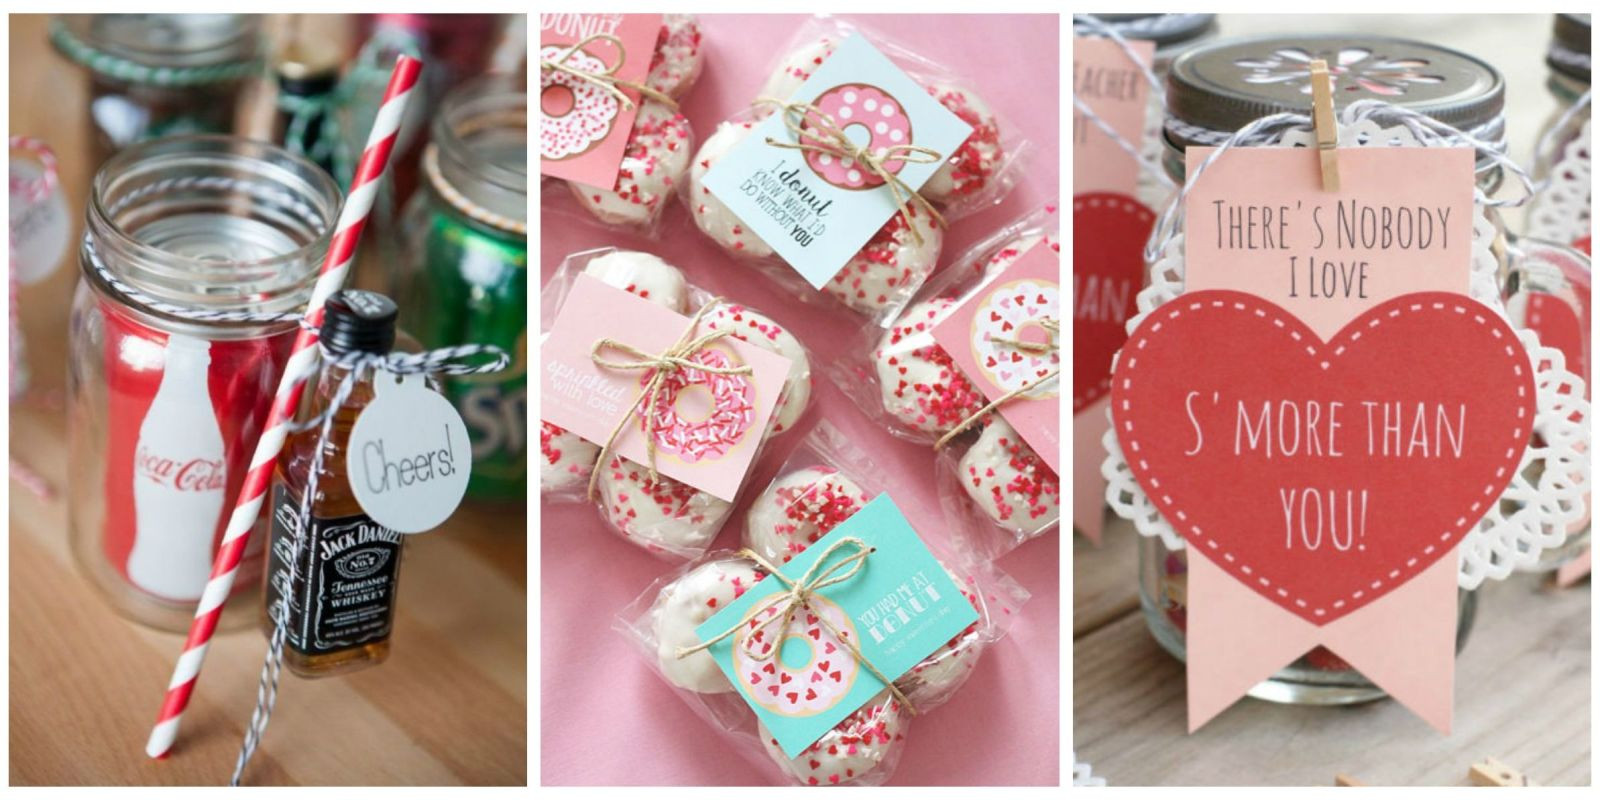 Valentines Gift Ideas For Friends
 11 DIY Valentine s Day Gifts for Friends Galentine s Day